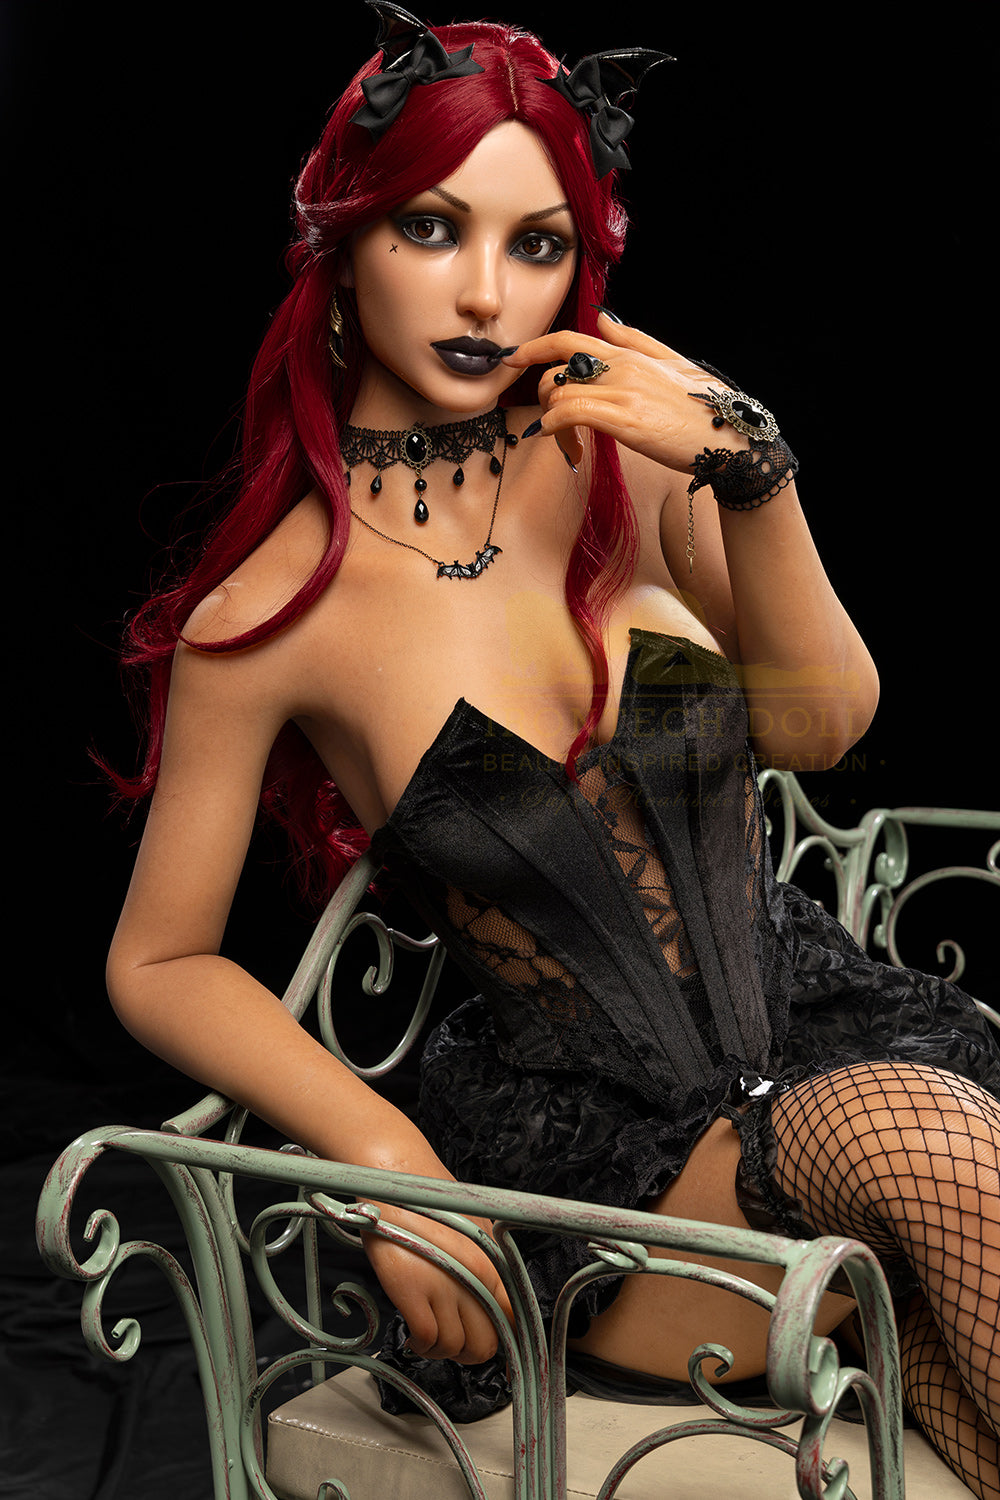 Irontechdoll Sara 5ft54 / 169cm S47 Head Full Silicone Dark Tanned Full Size Cosplay Sex Doll With Red Hair